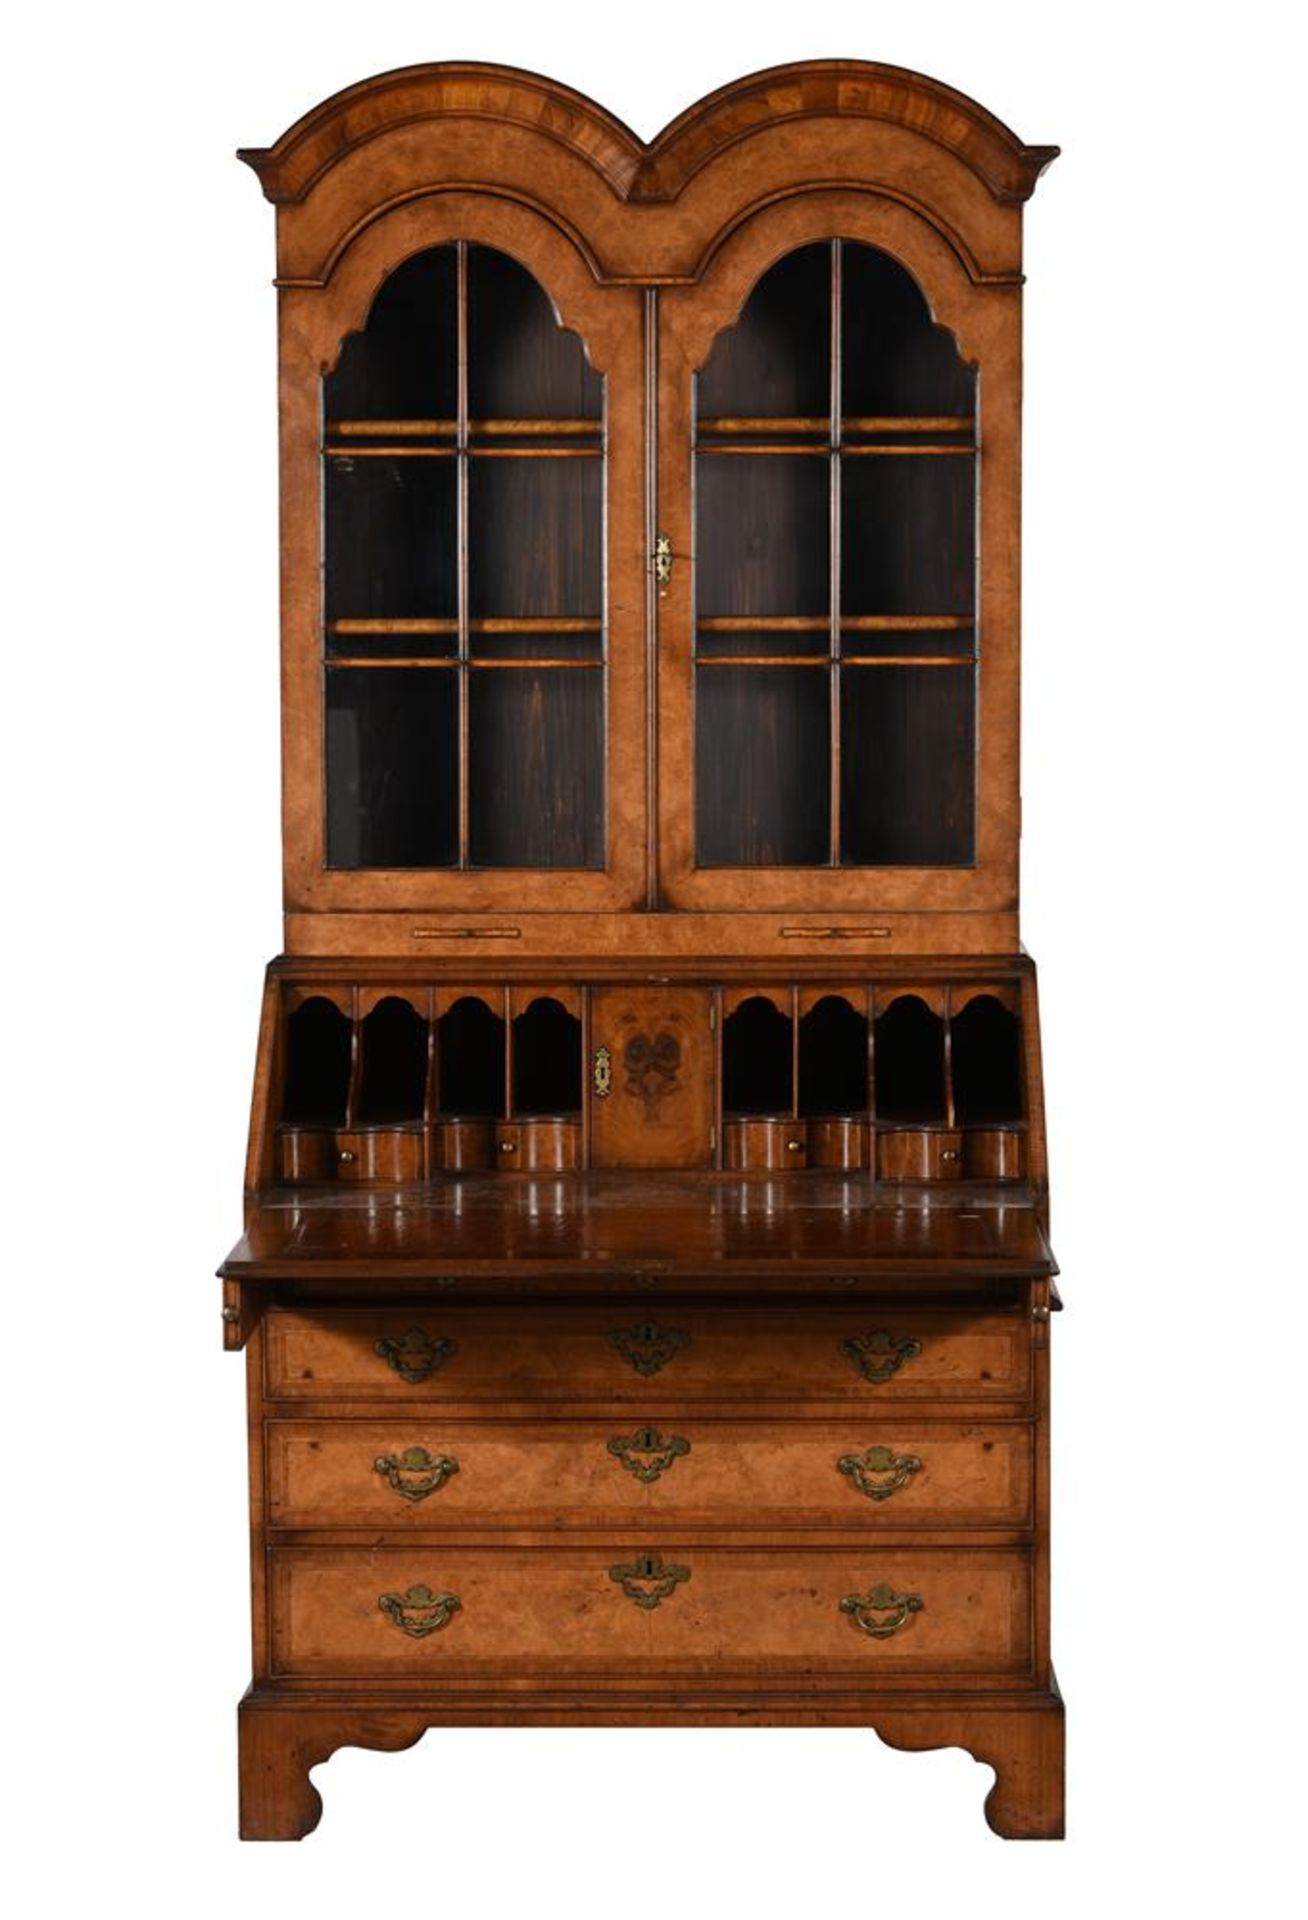 A WALNUT DOUBLE-DOME TOP BUREAU BOOKCASE IN QUEEN ANNE STYLE - Image 2 of 8